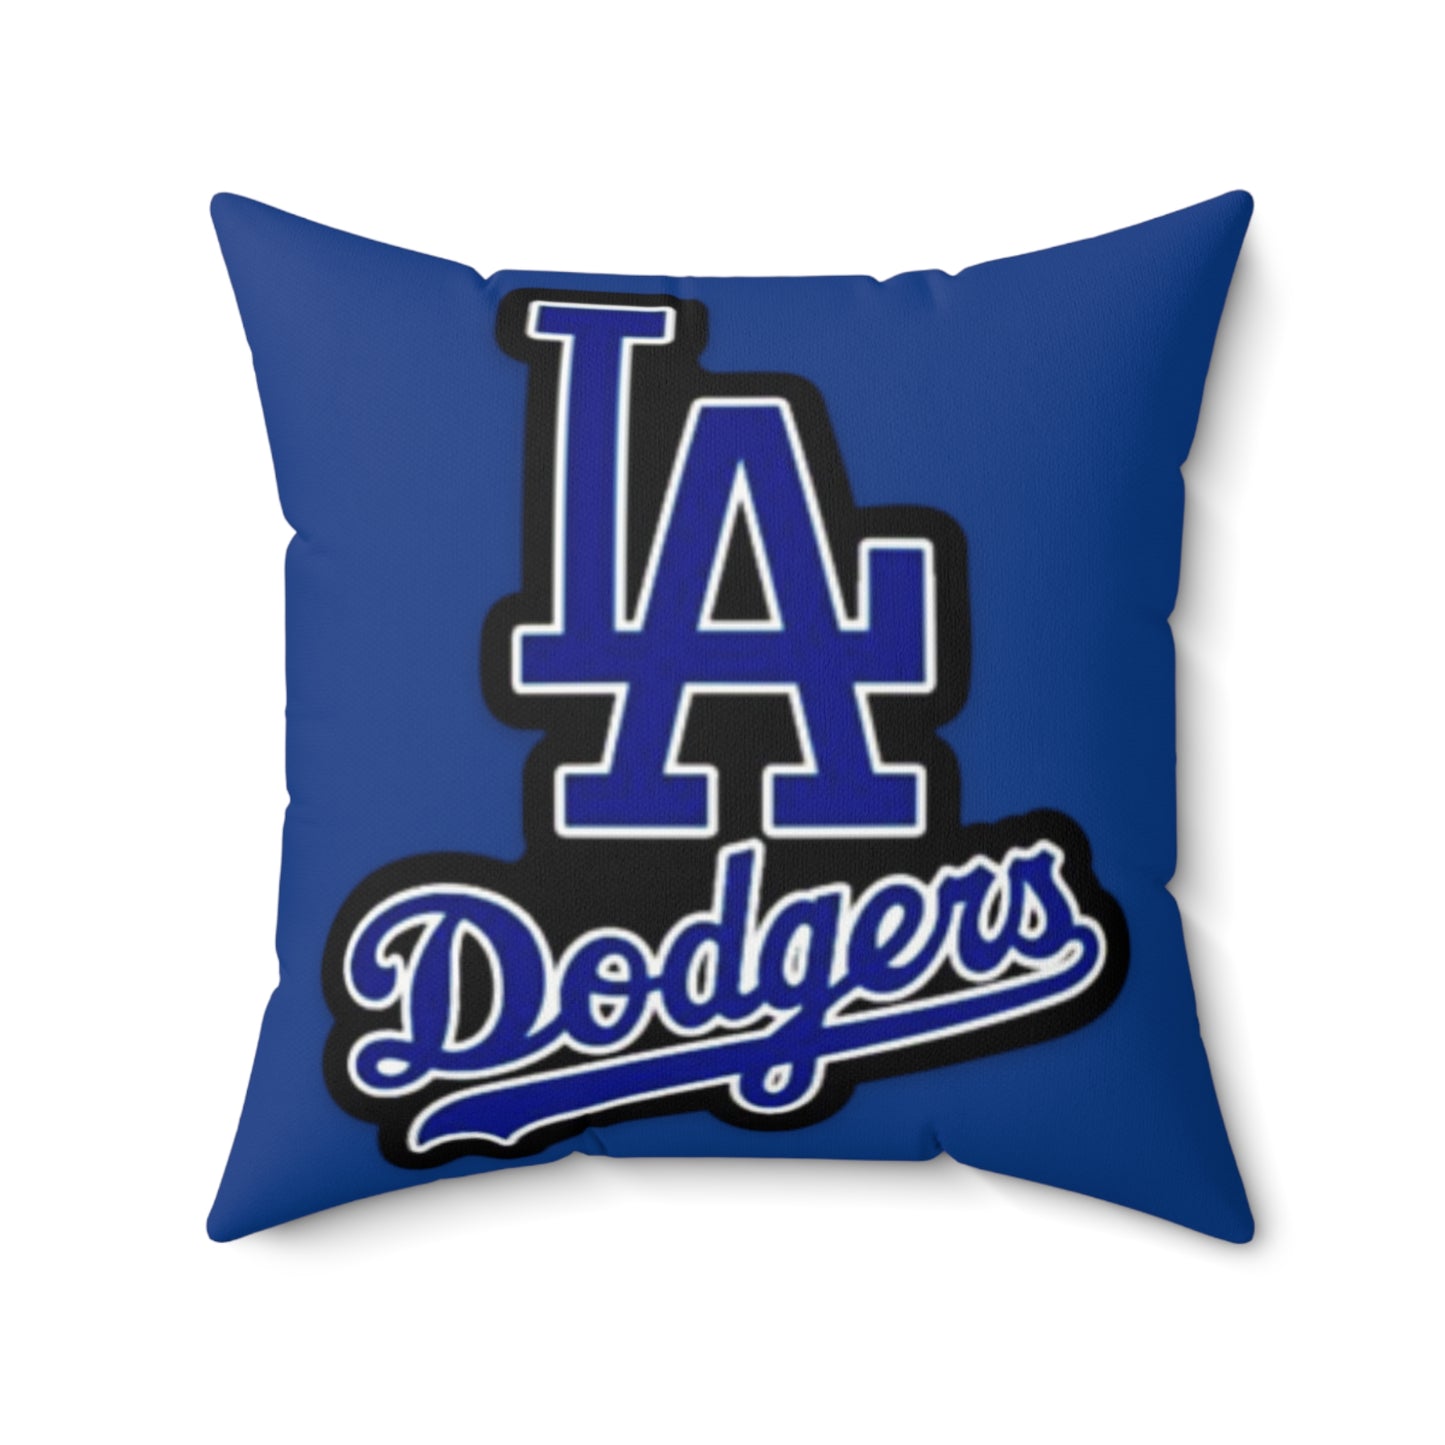 Los Angeles Dodgers - Spun Polyester Square Pillow